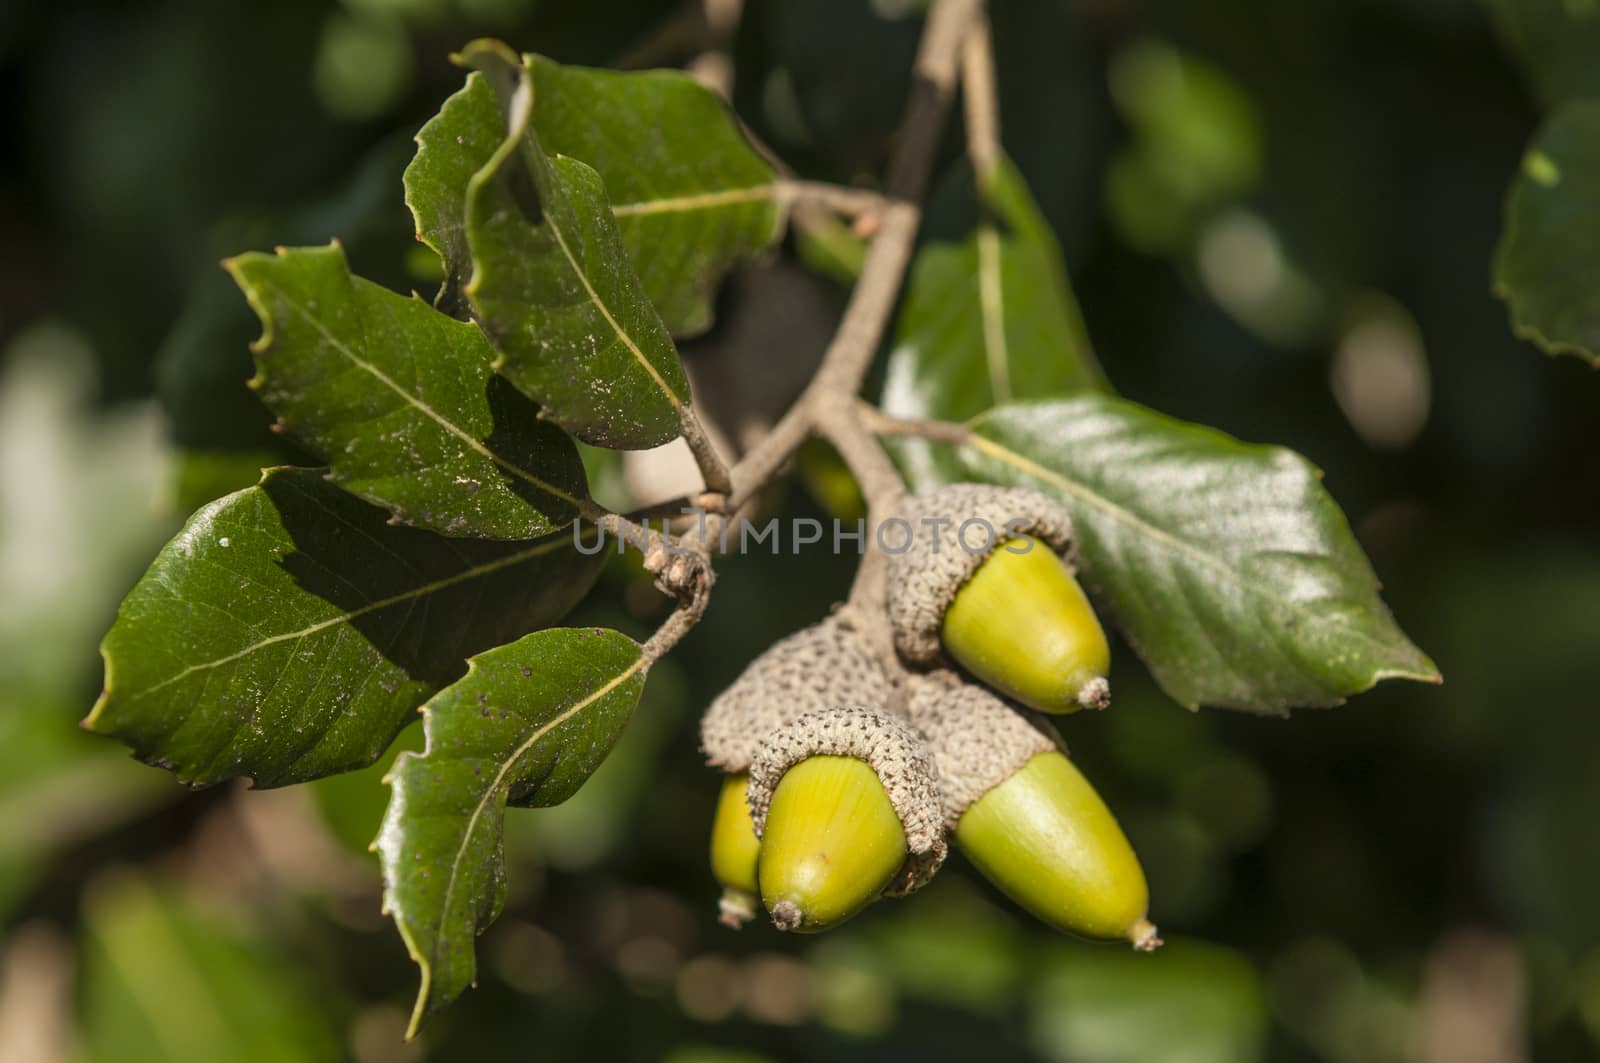 Green leaves and acorns of holm oak tree in autumn